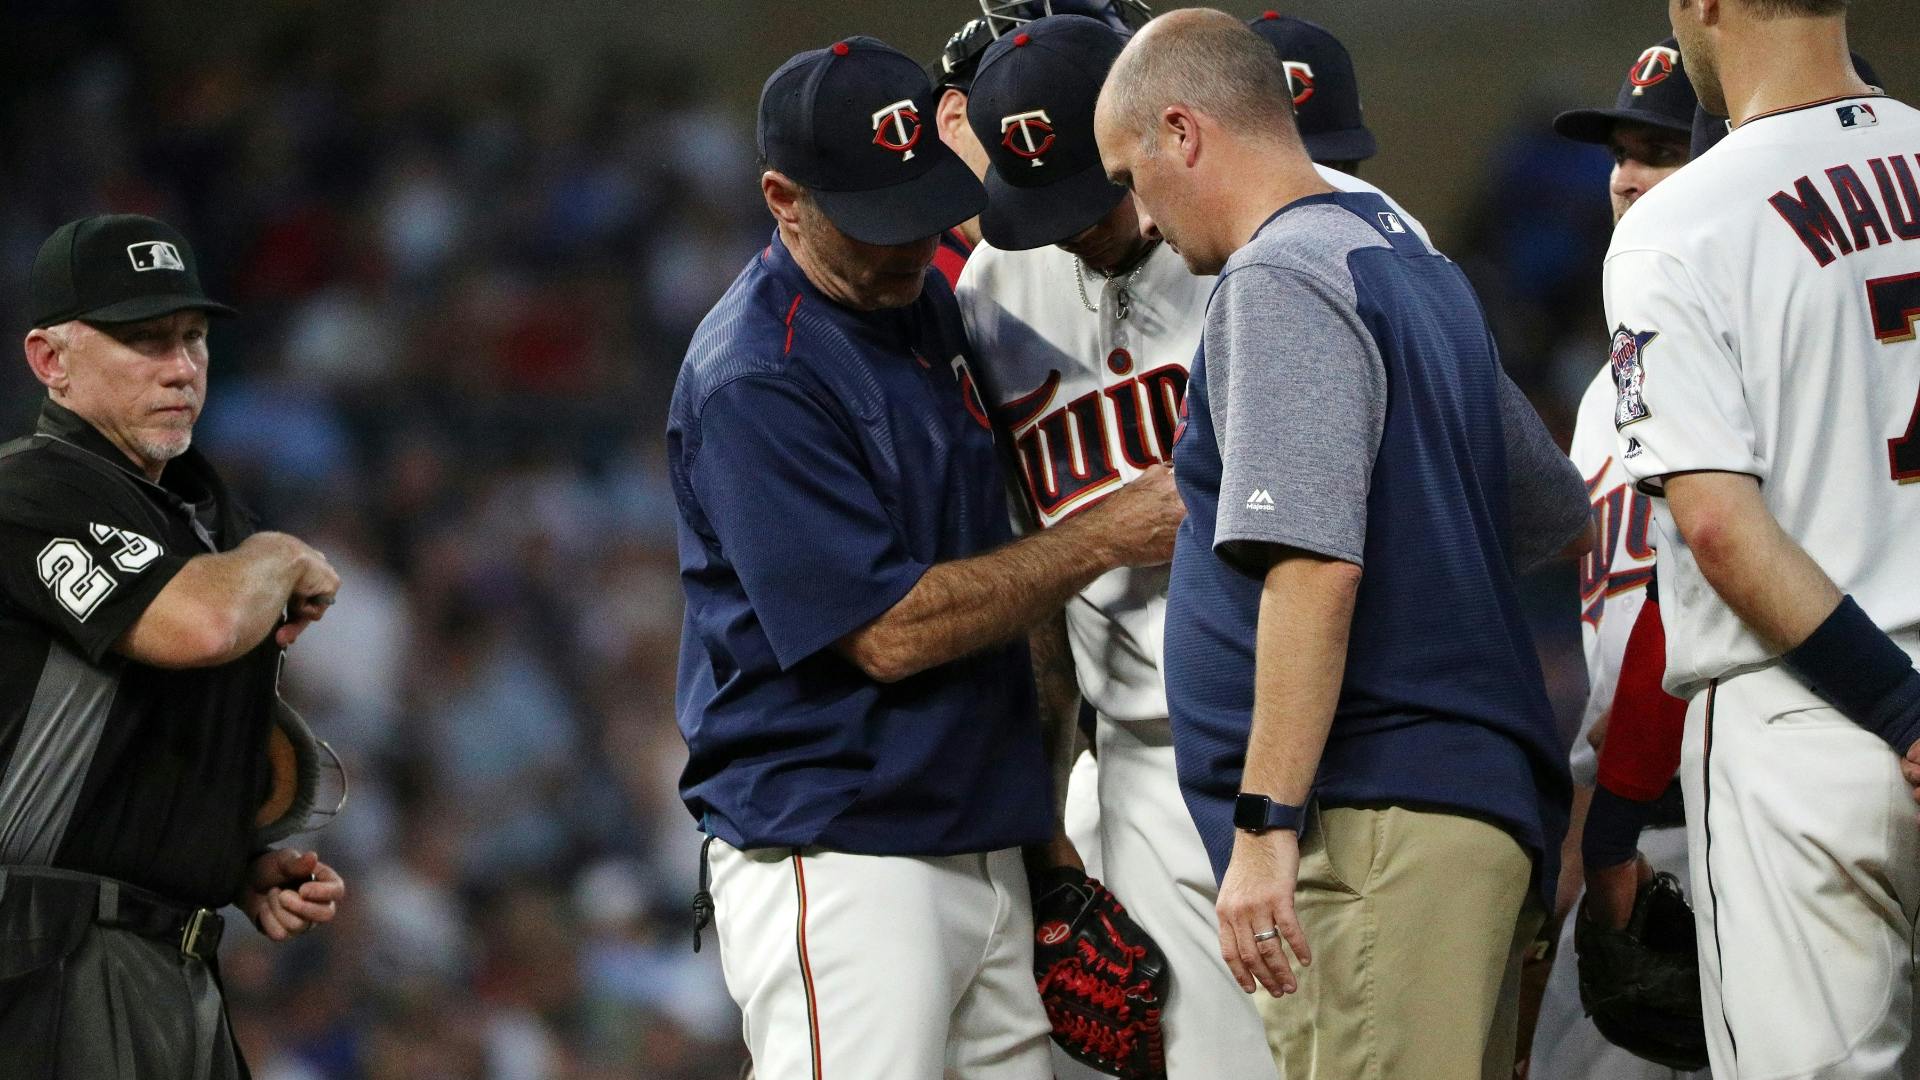 Twins lefthander Adalberto Mejia says he felt pain in his pitching arm during the second inning Tuesday, but hoped it would go away.